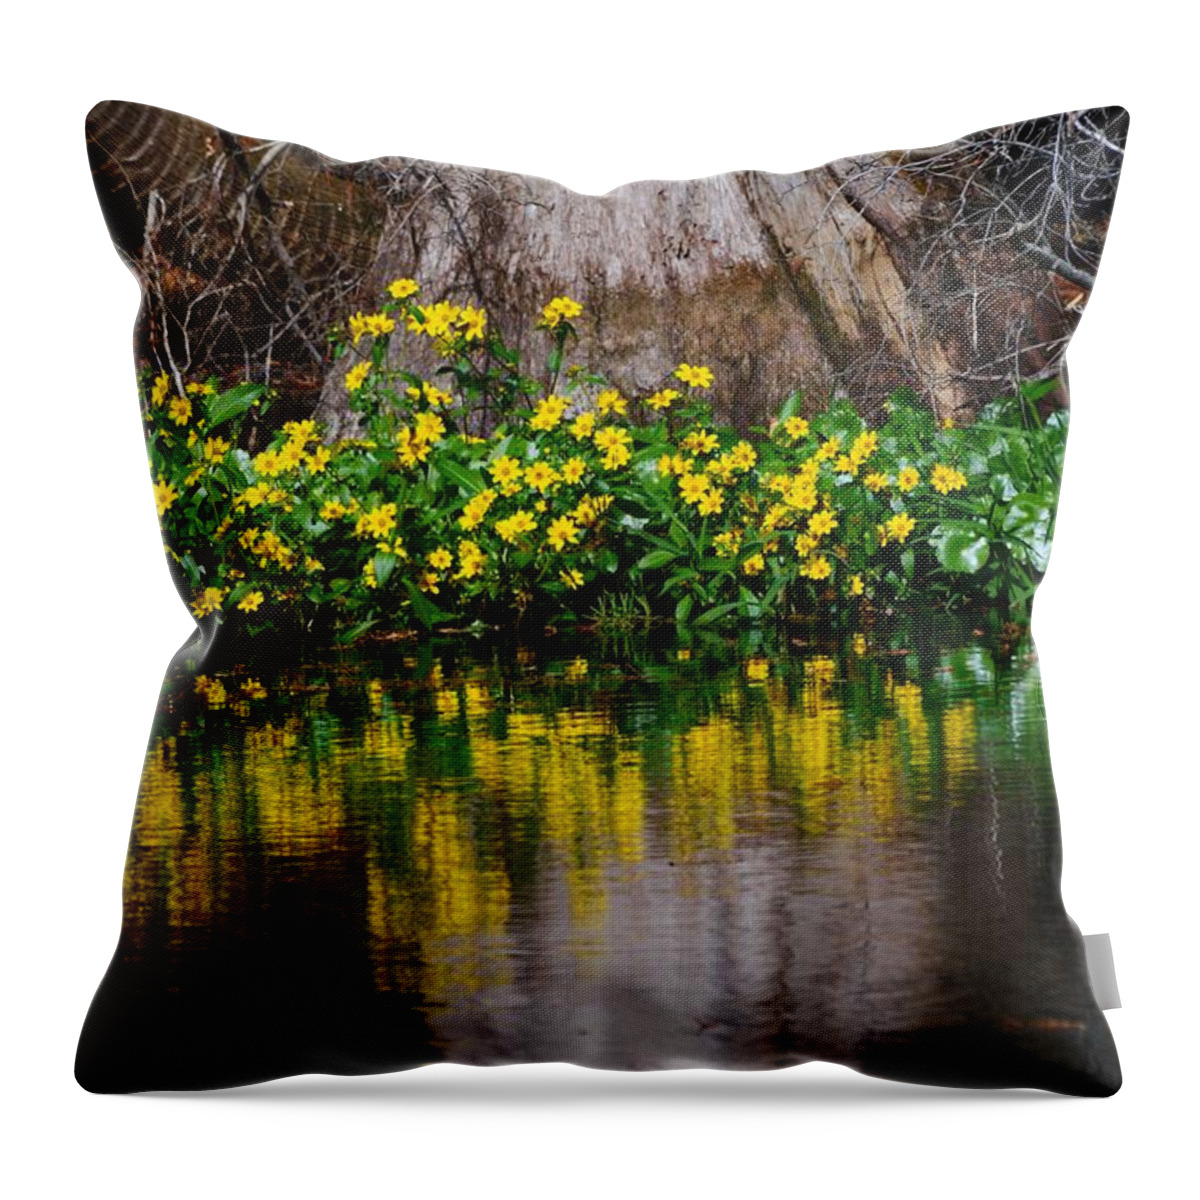 River And Flowers Closeup Throw Pillow featuring the photograph River and Flowers Closeup by Warren Thompson